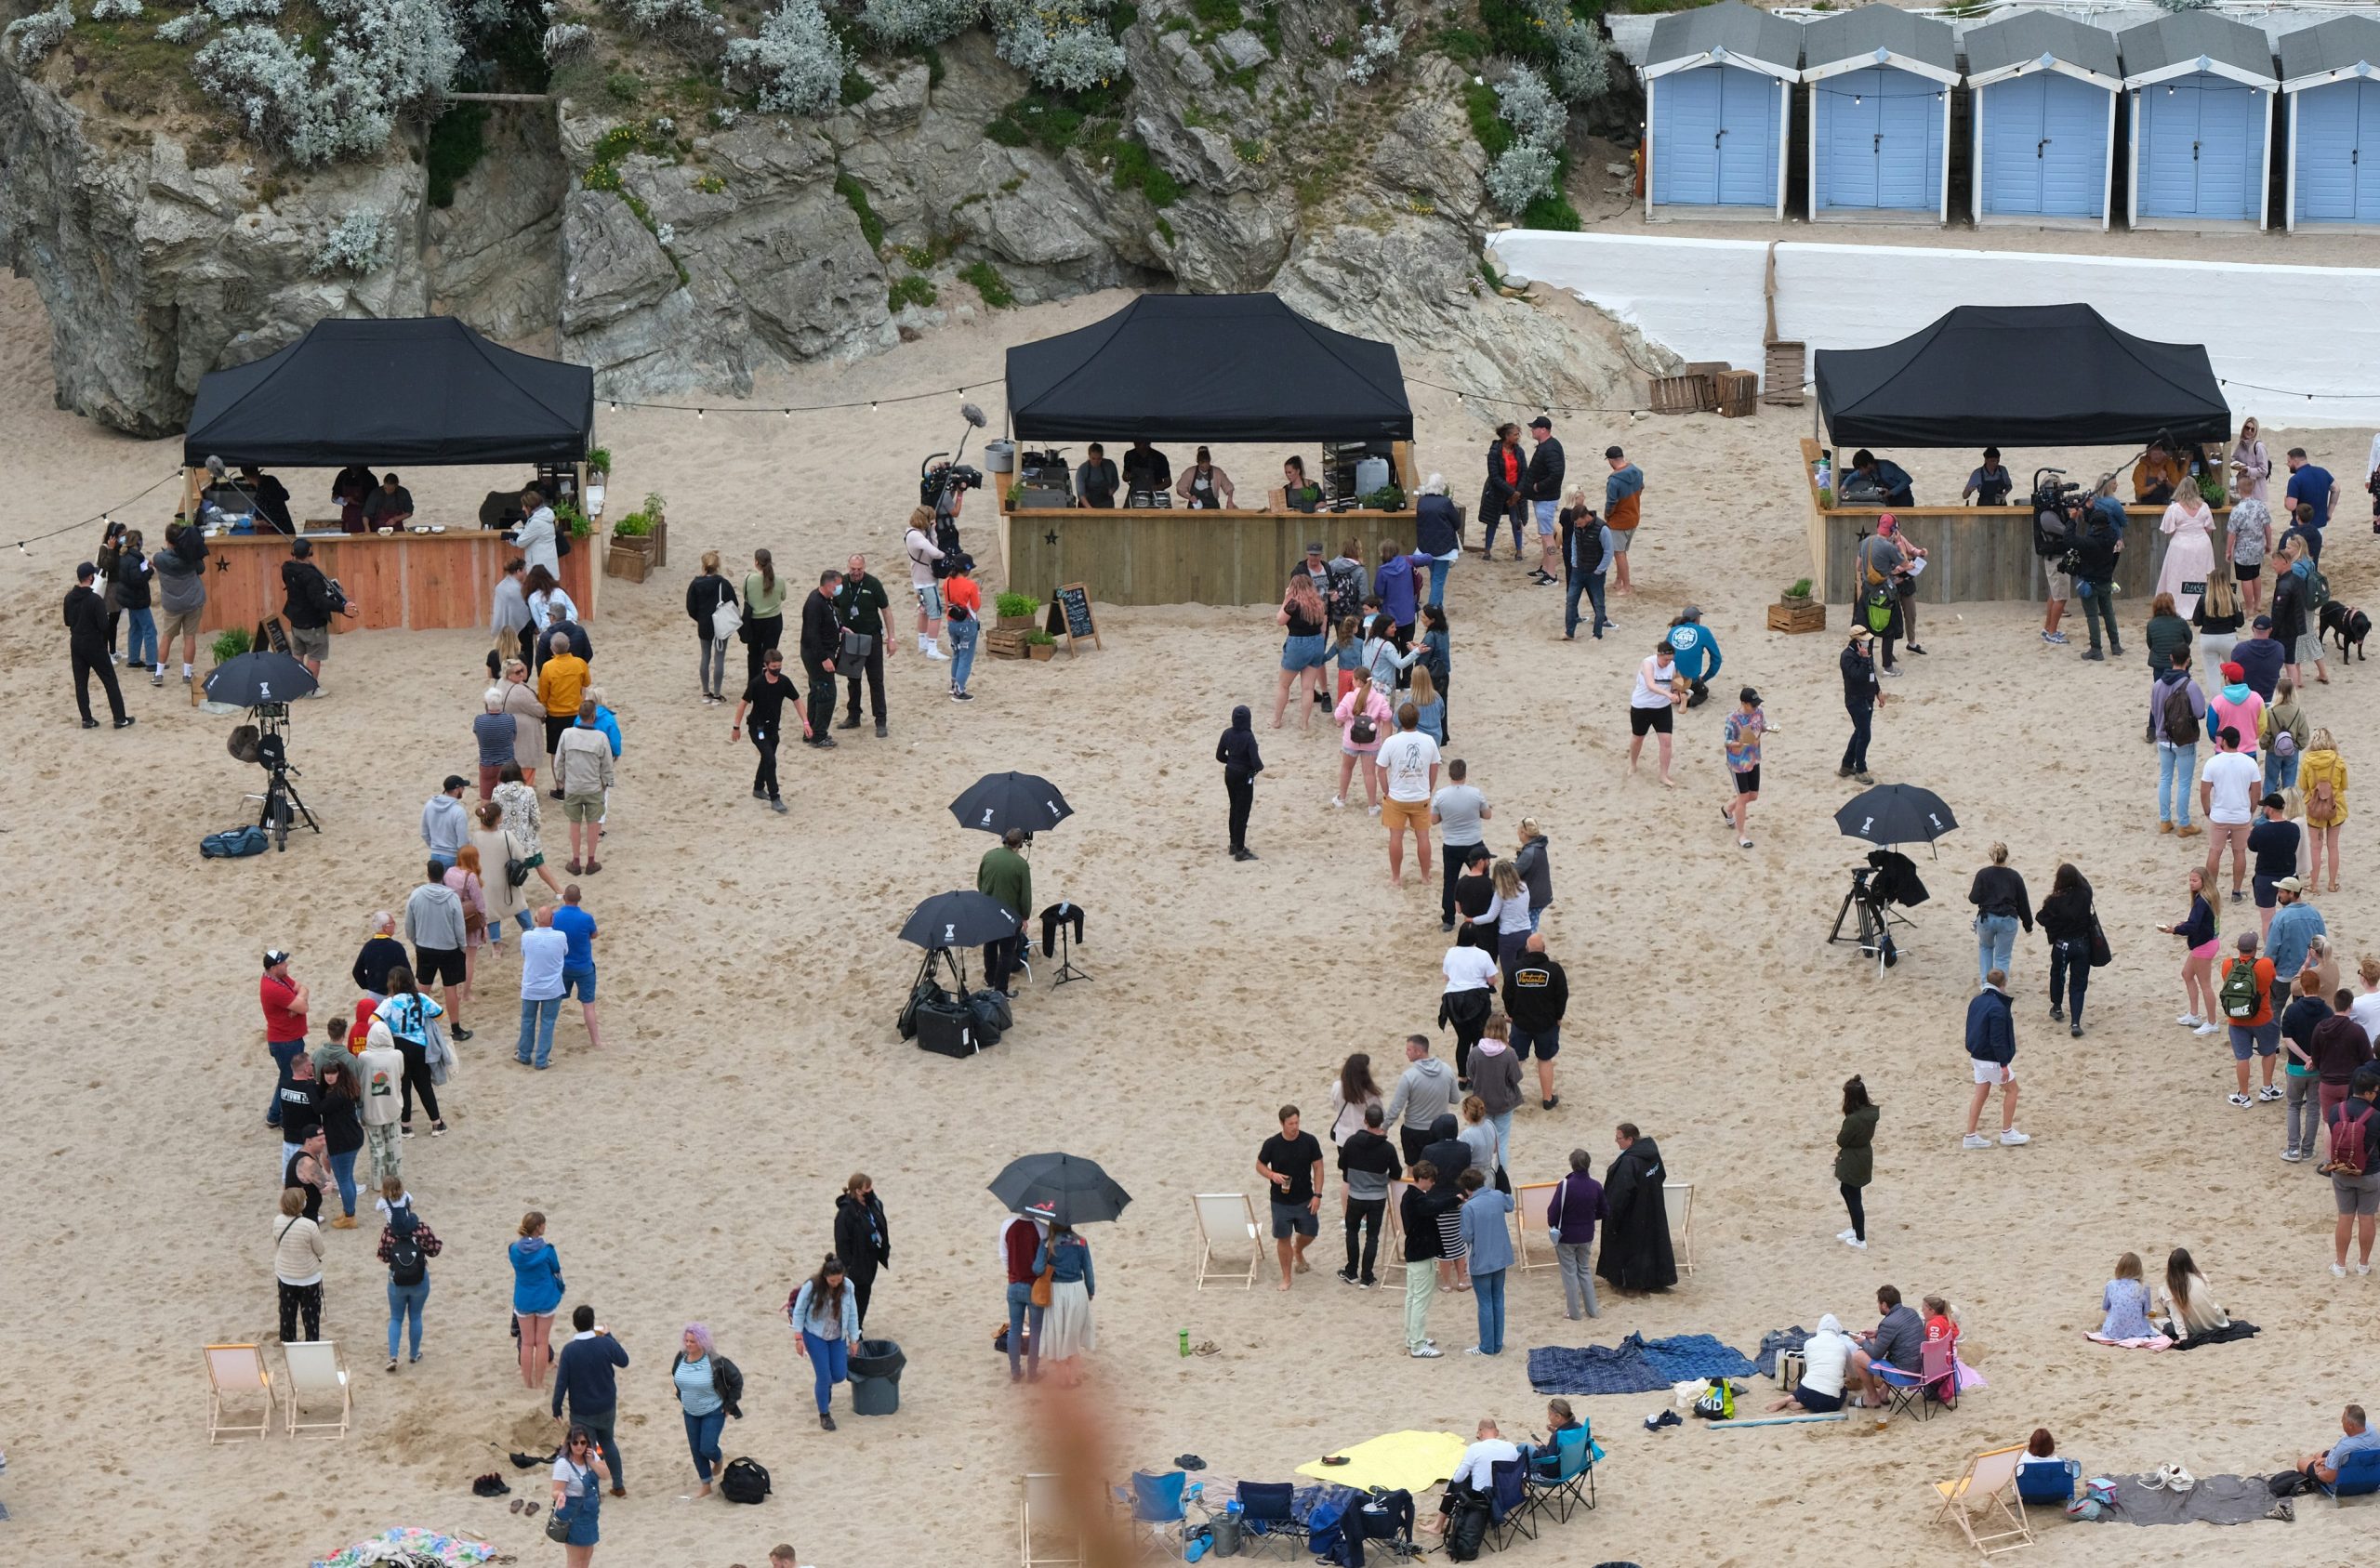 Gordon Ramsay's film crew took over a beach in Cornwall in June for new show Future Food Stars.